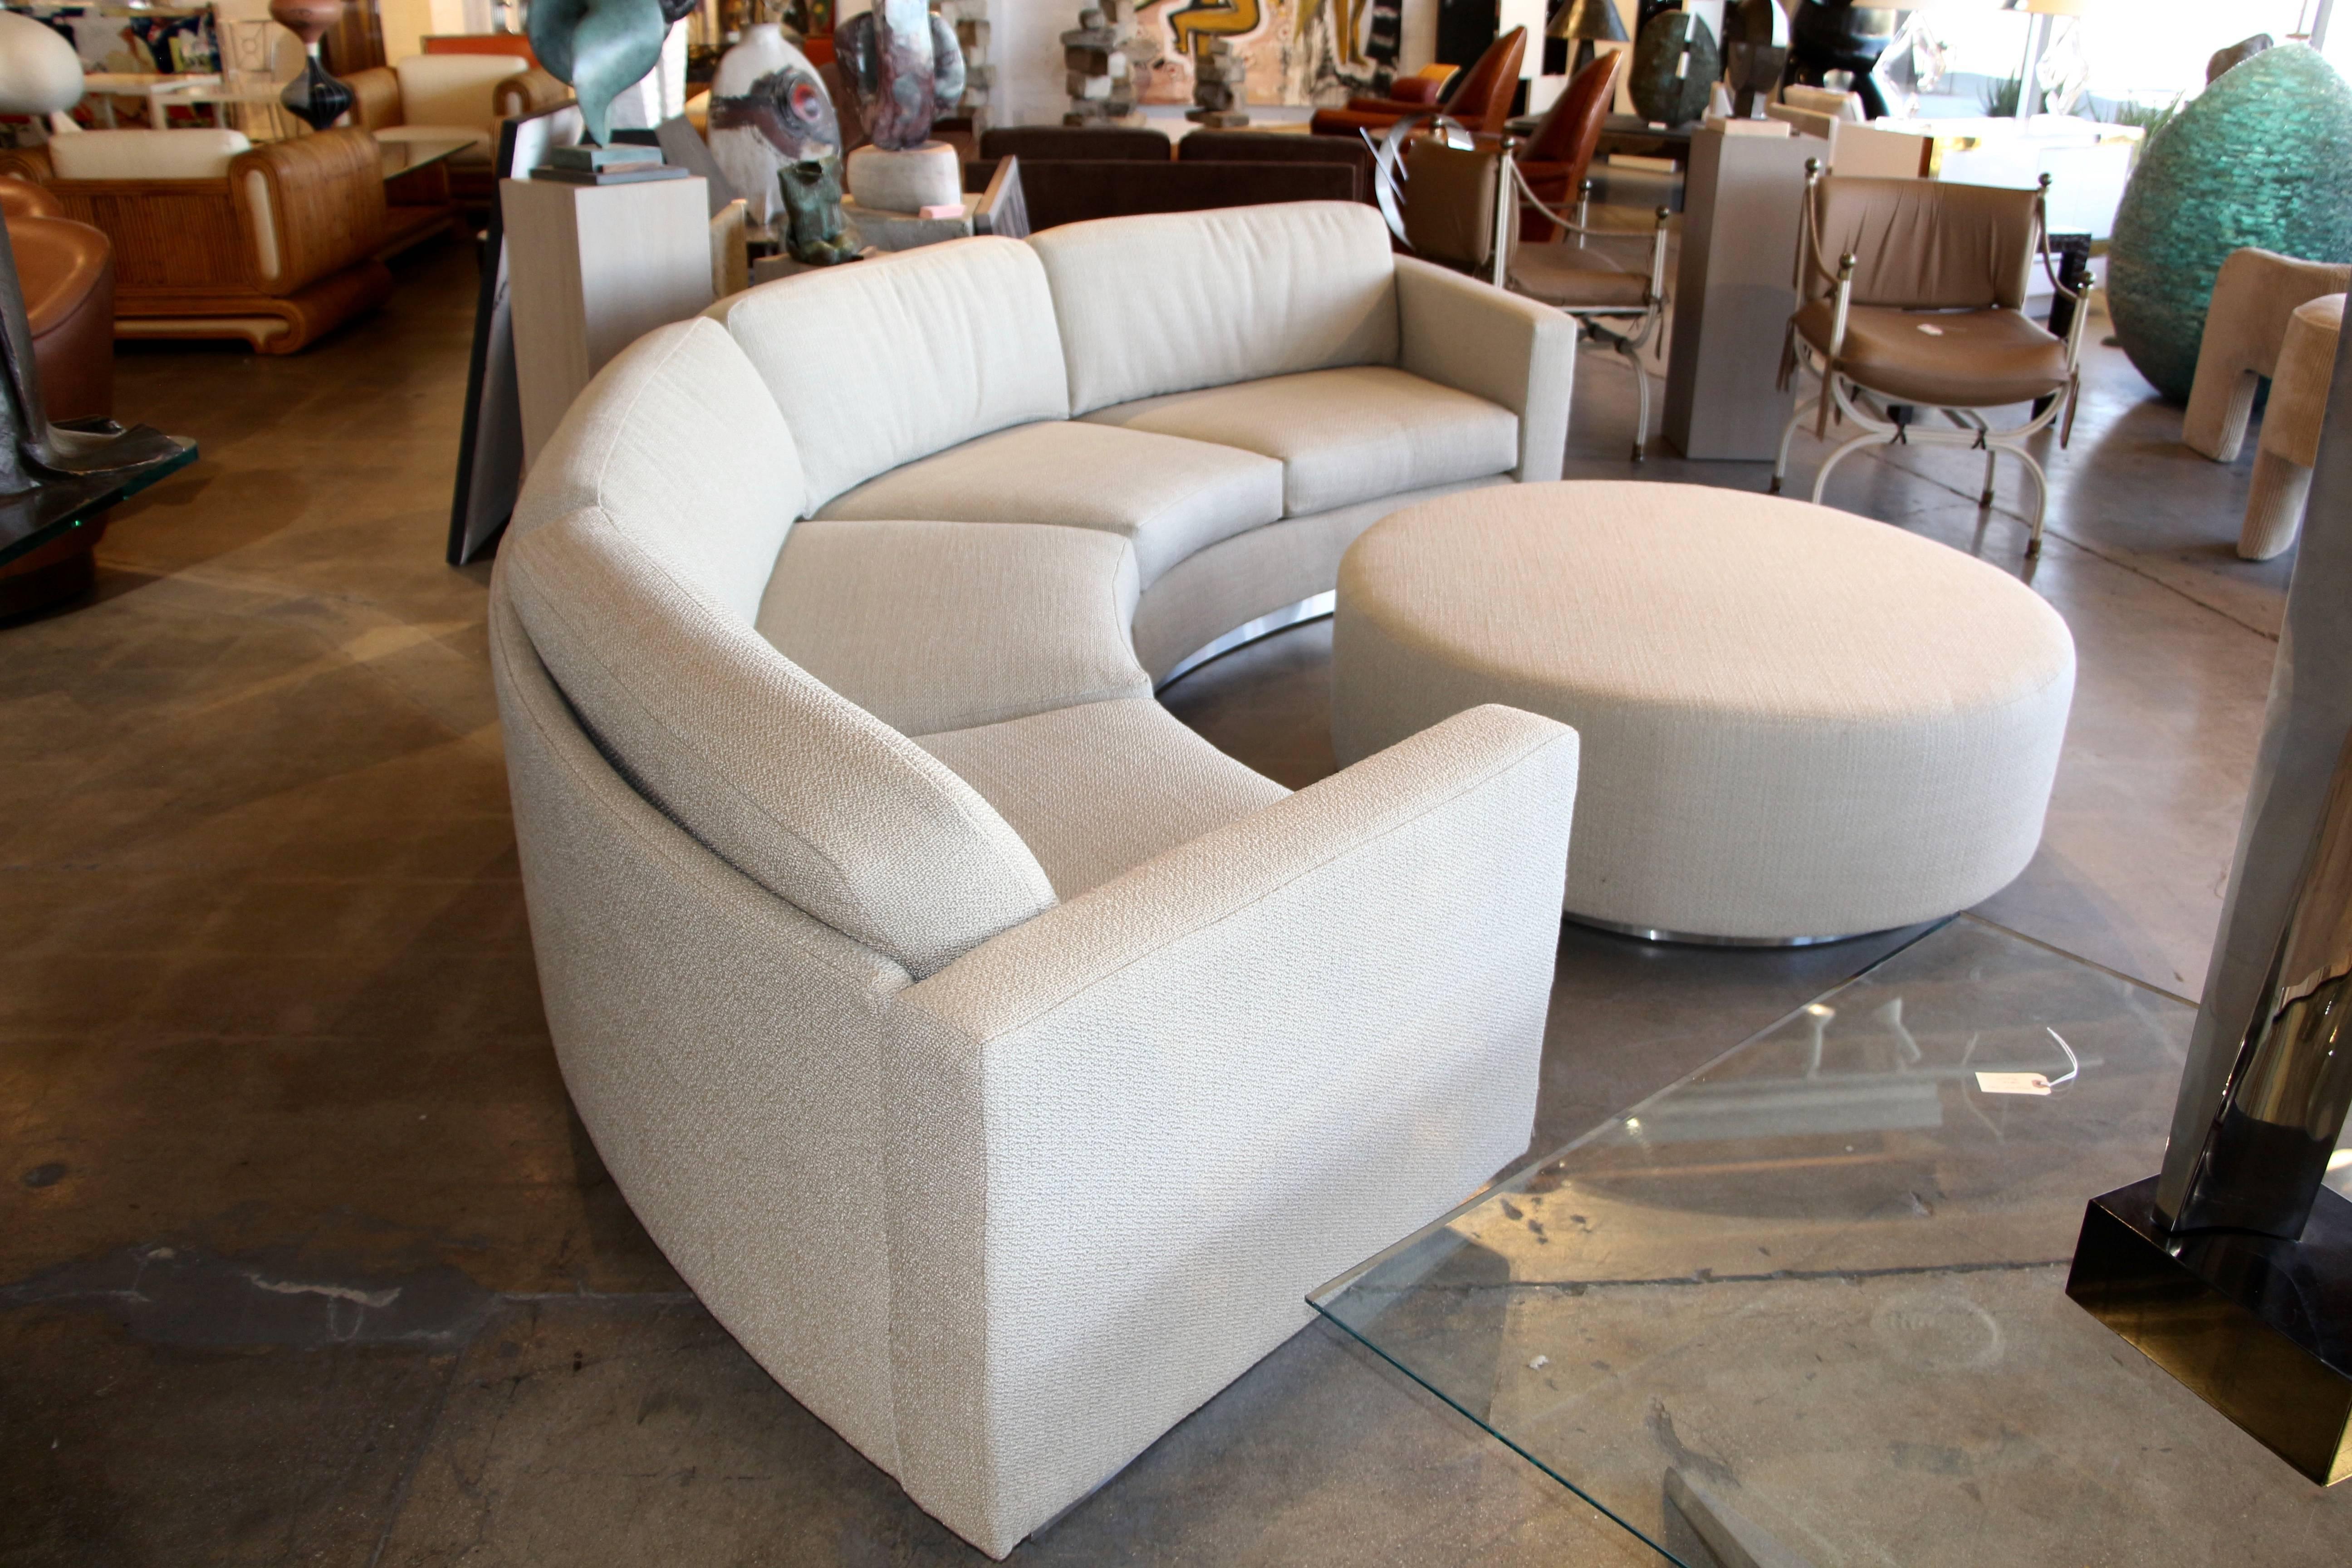 A great looking Thayer Coggin by Milo Baughman designed sectional curved sofa with matching ottoman. We have had the sofa and ottoman completely restored and re-upholstered. Additionally we have added a plinth base covered in brushed steel. This